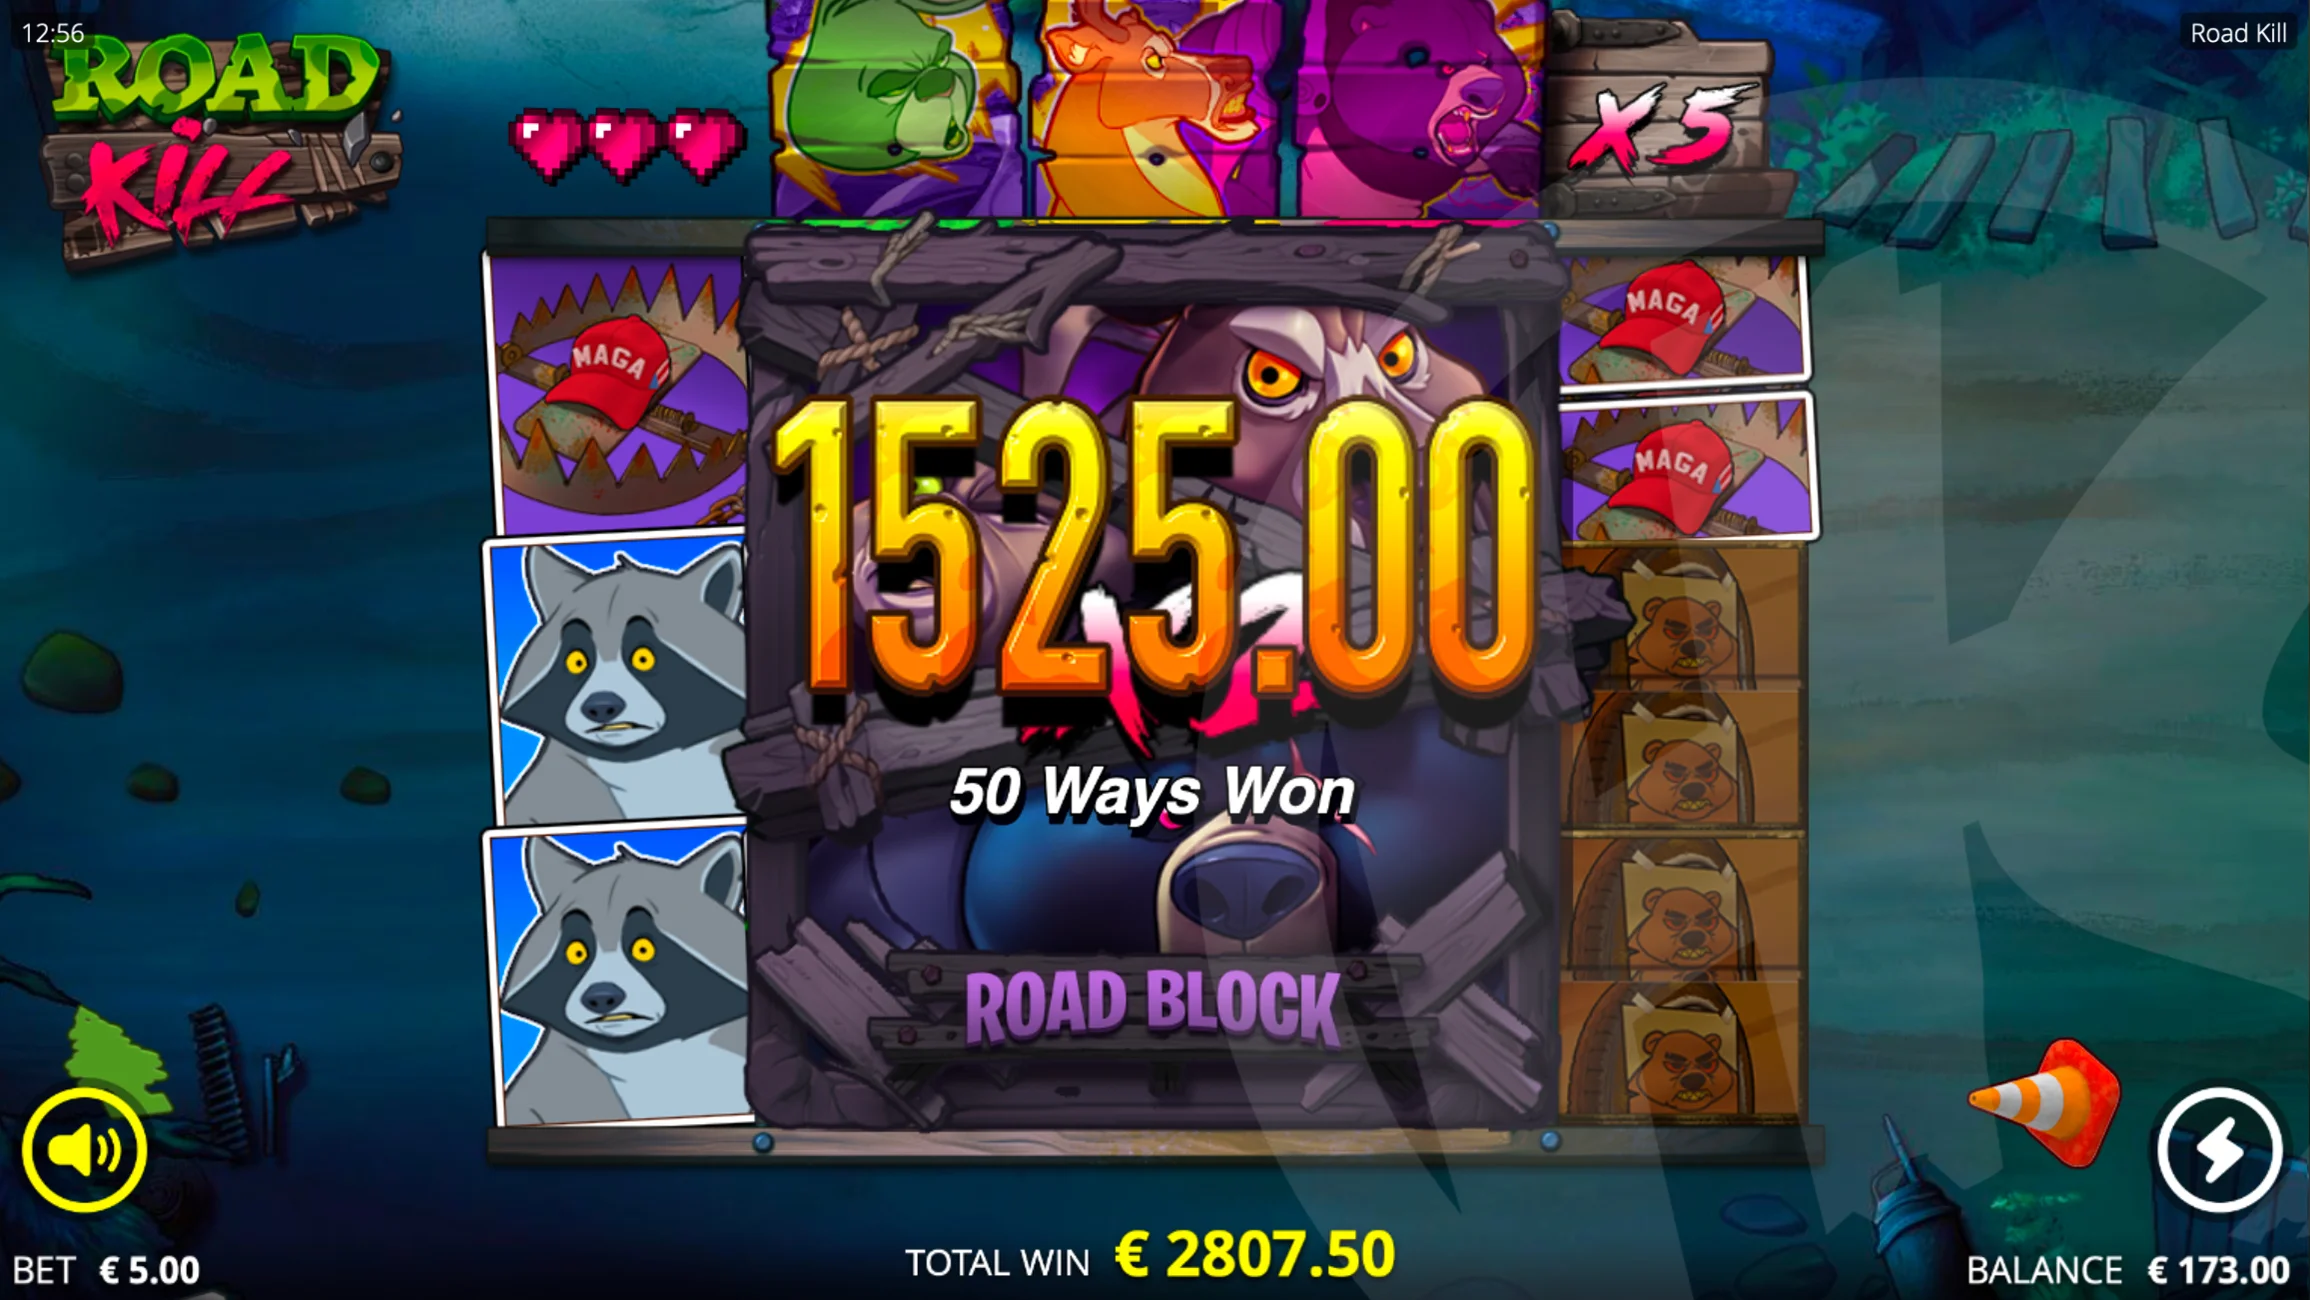 Collect a Total of 20 Hits to Trigger the Roadblock Feature